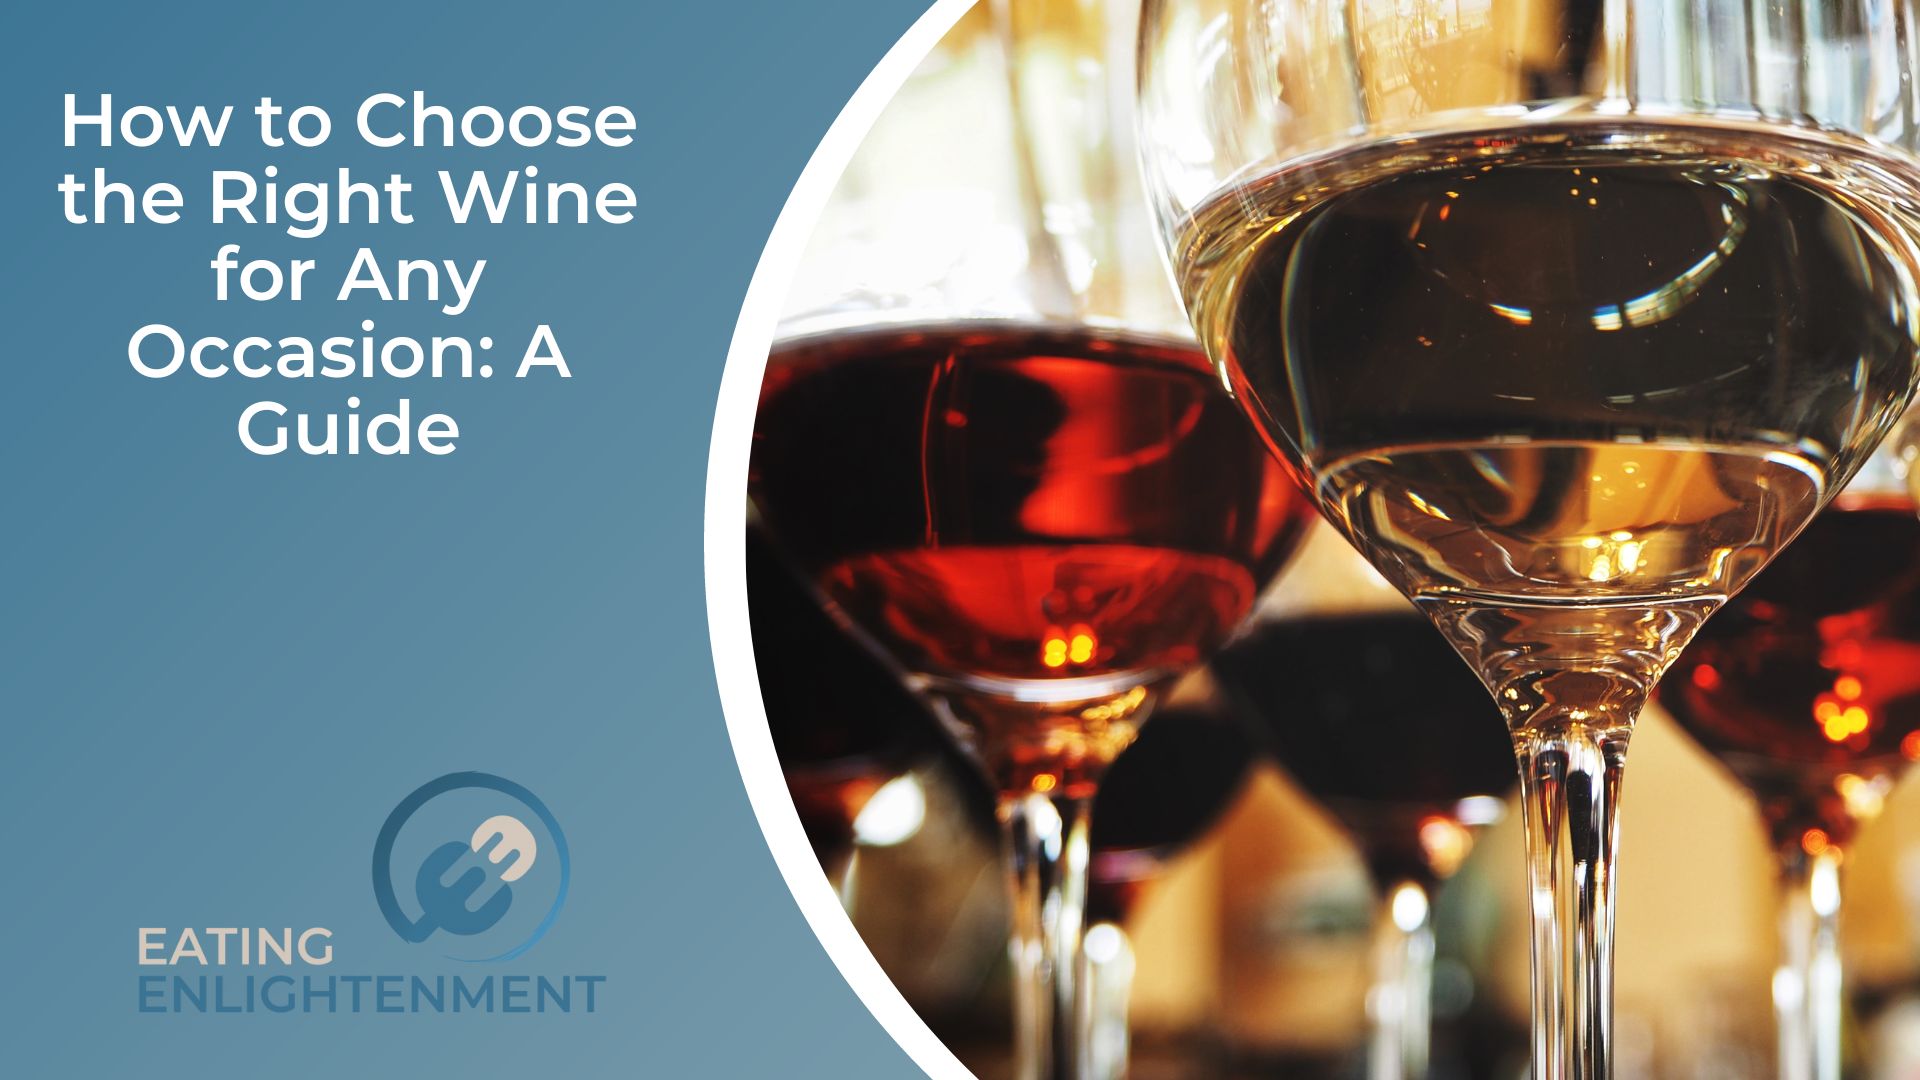 How to Choose the Right Wine for Any Occasion A Guide